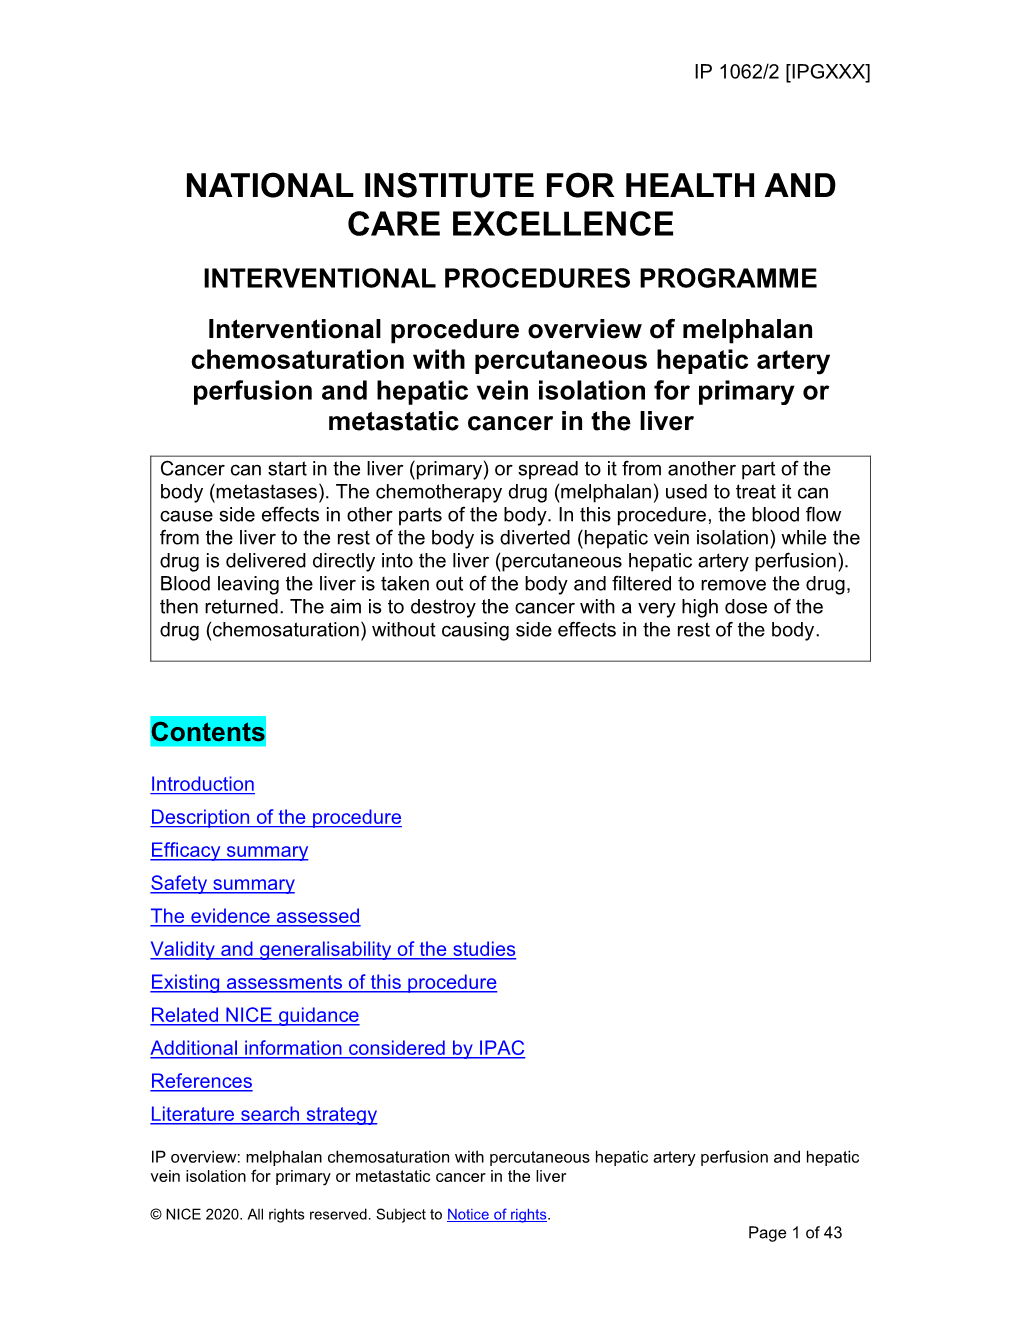 The National Institute for Health and Care Excellence